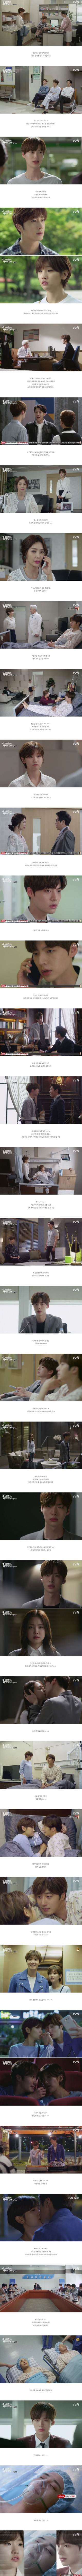 final episodes 15 and 16 captures for the Korean drama 'Cinderella and the Four Knights'